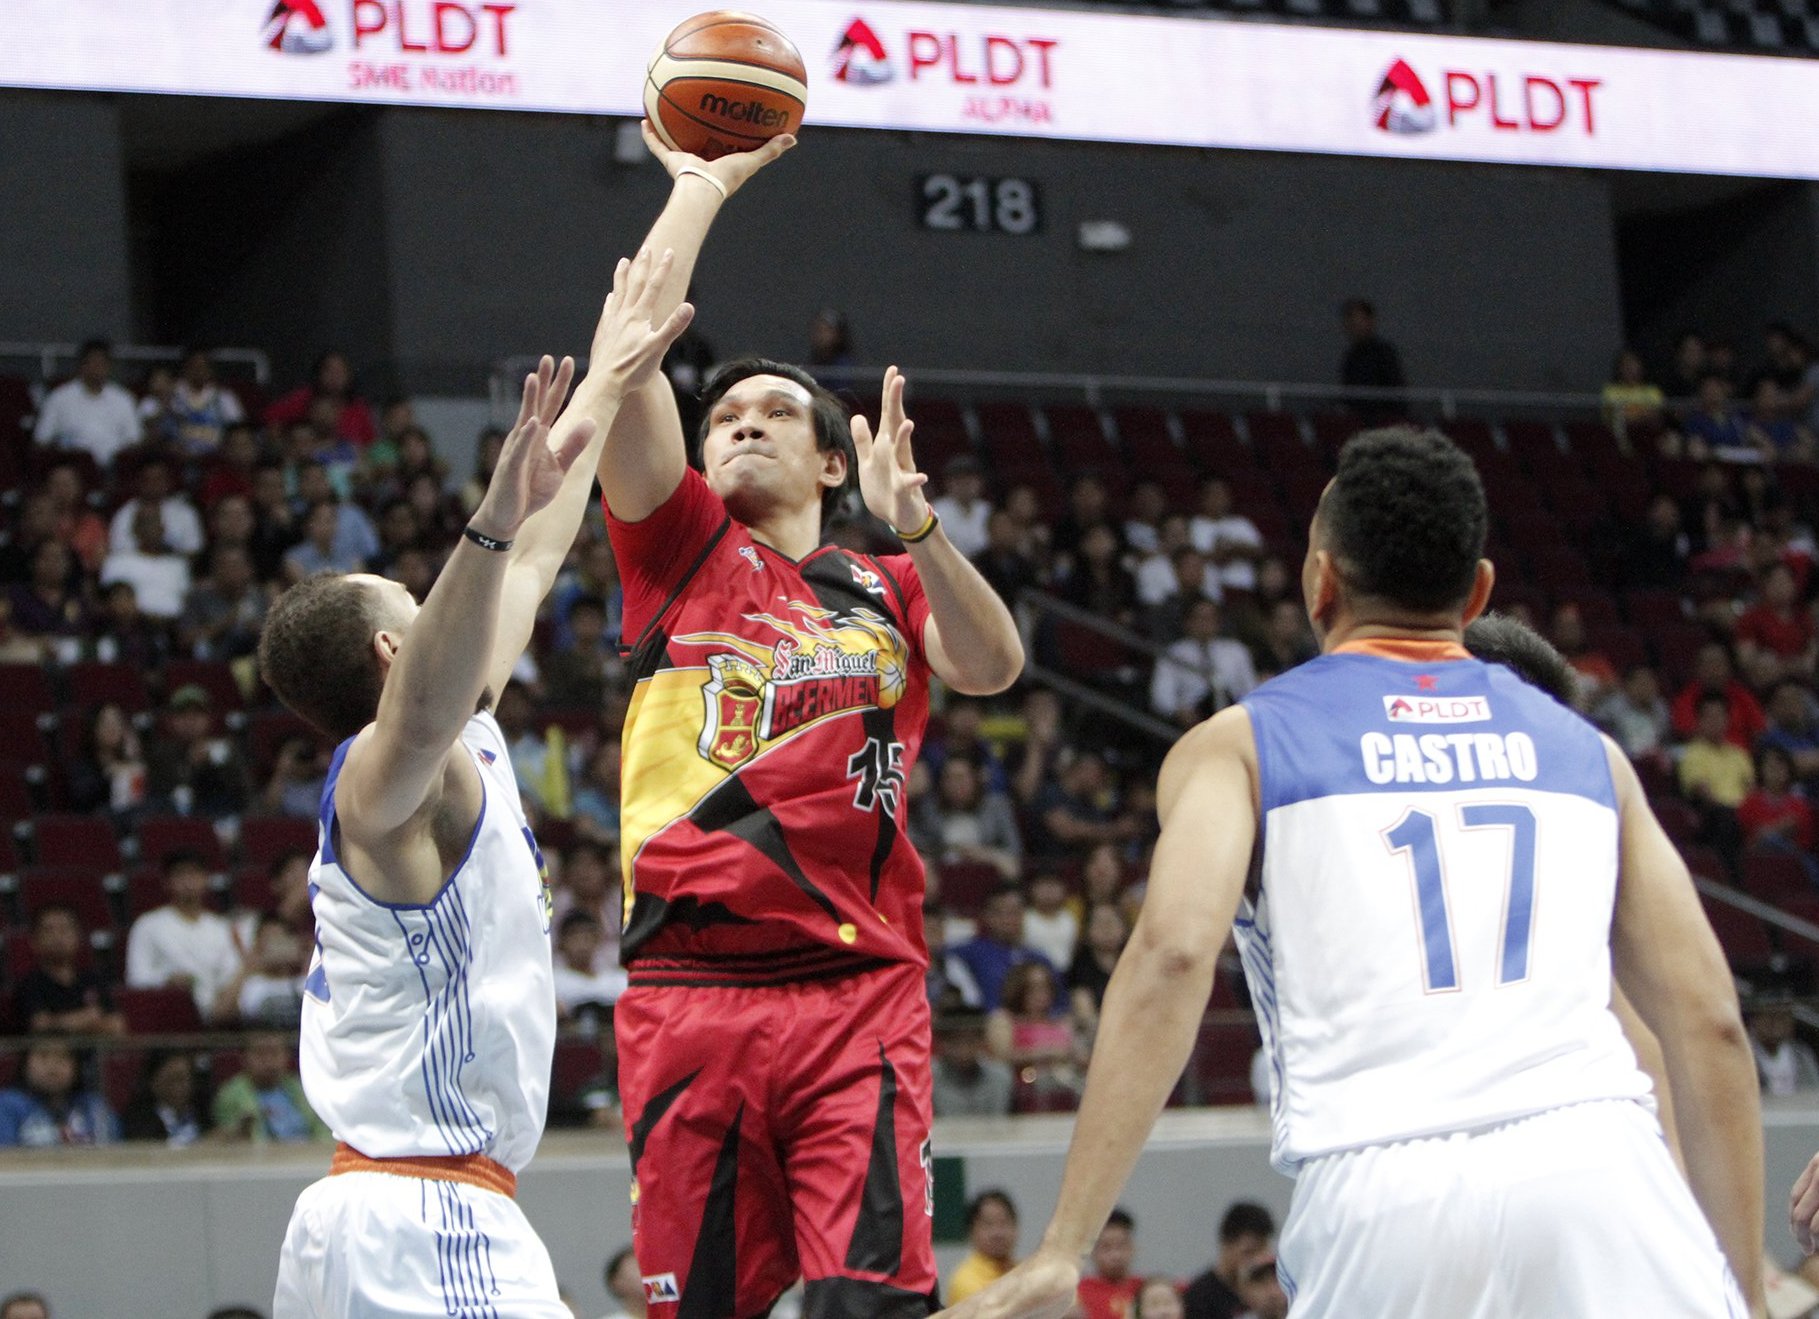 Fajardo explode in game 6, with 23pts and 21 rebound